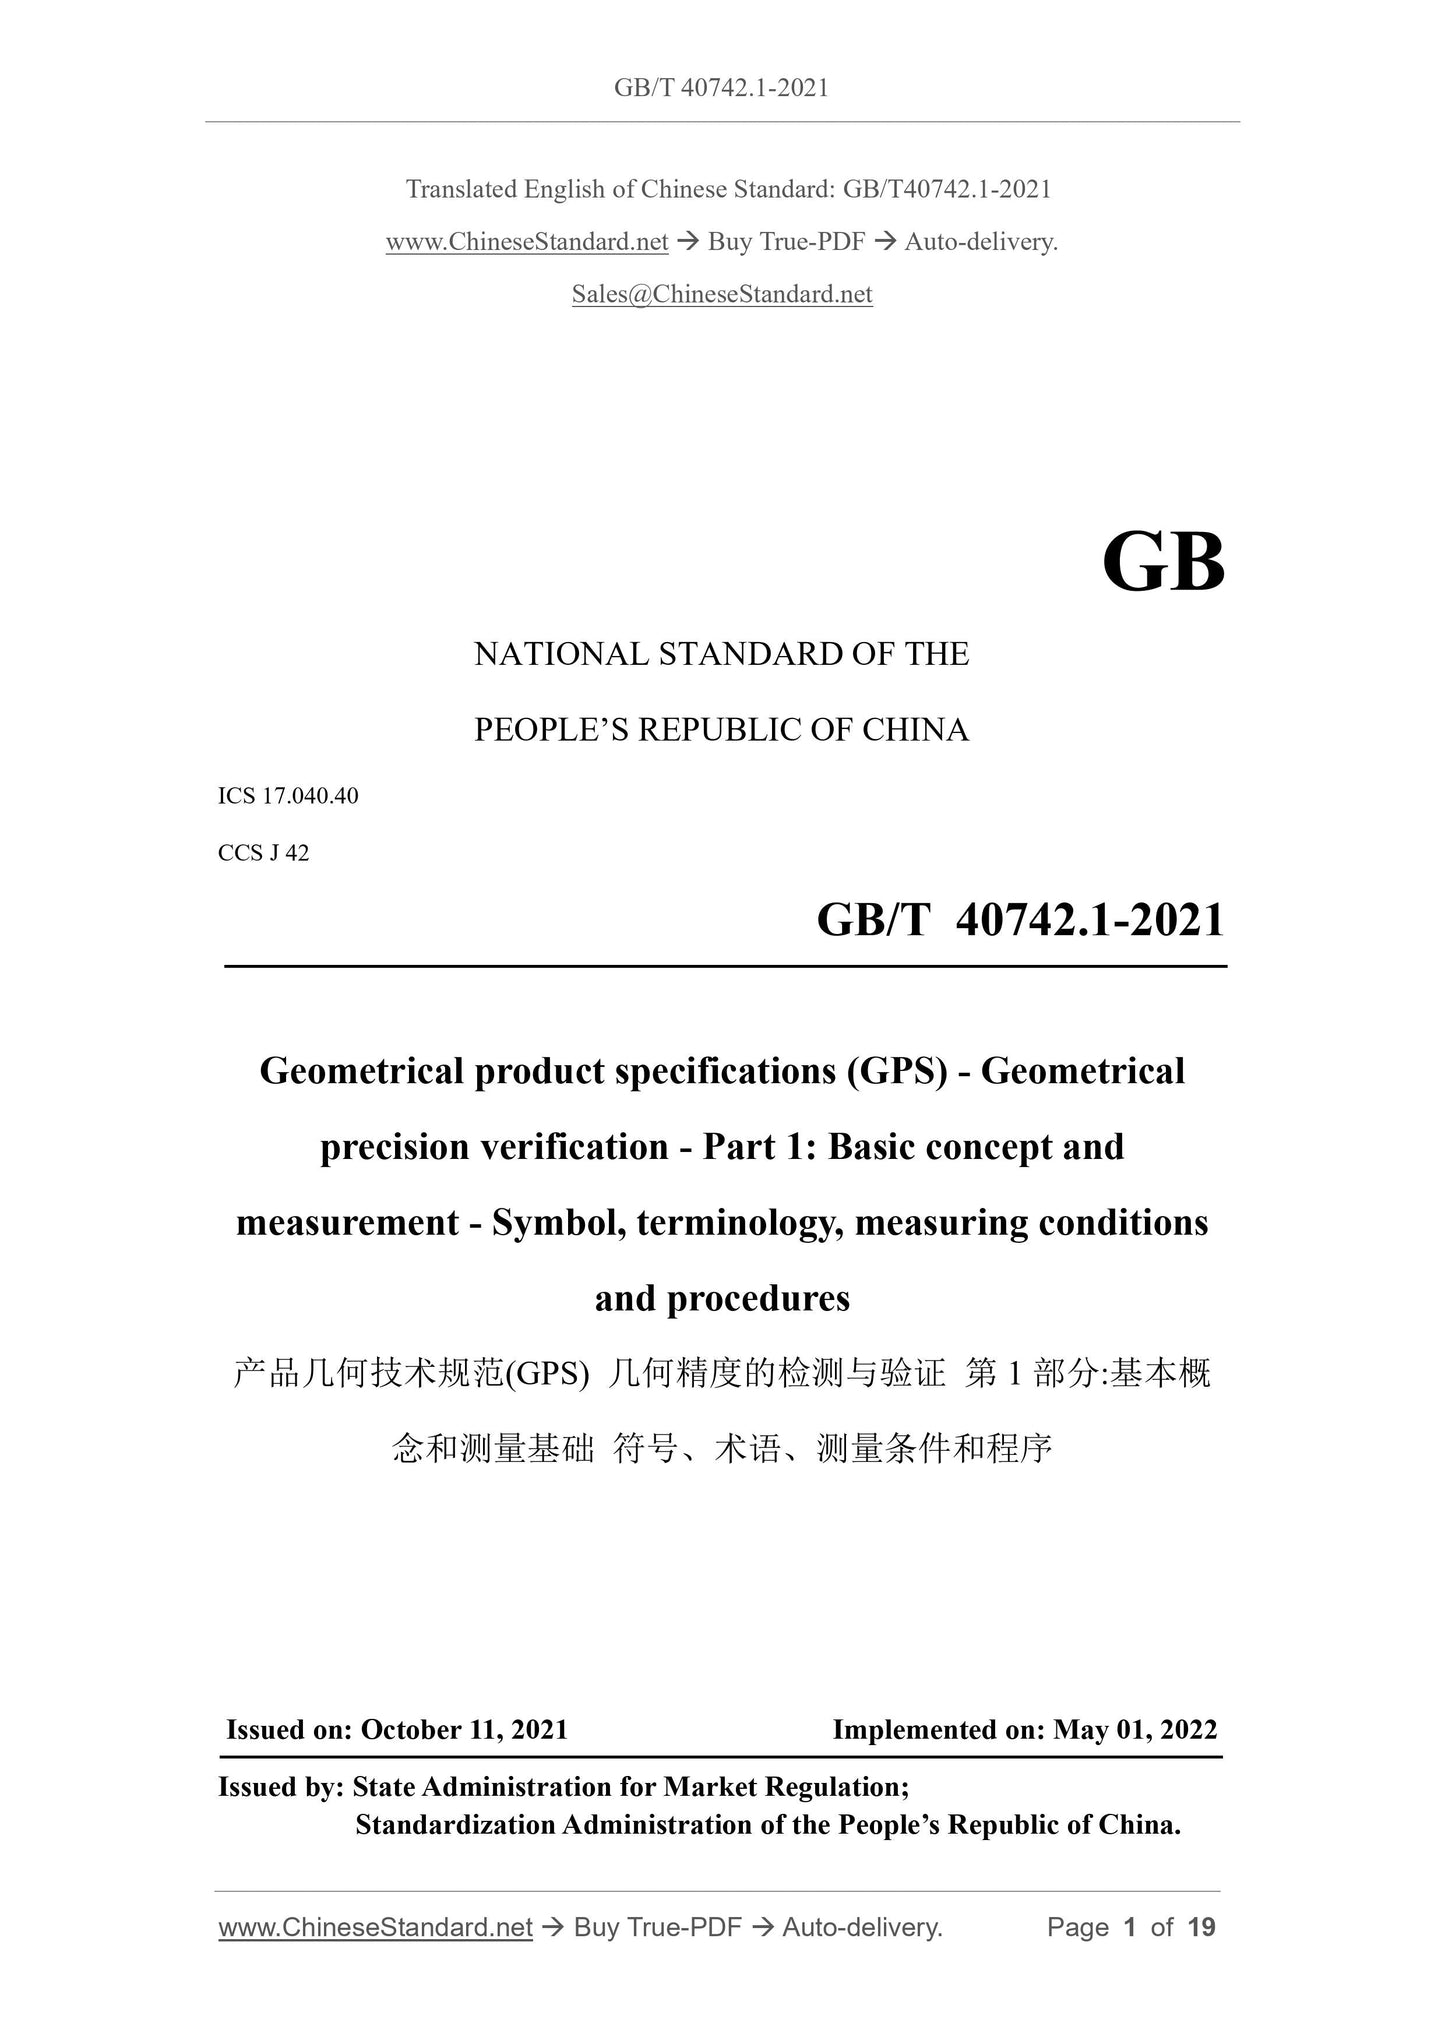 GB/T 40742.1-2021 Page 1